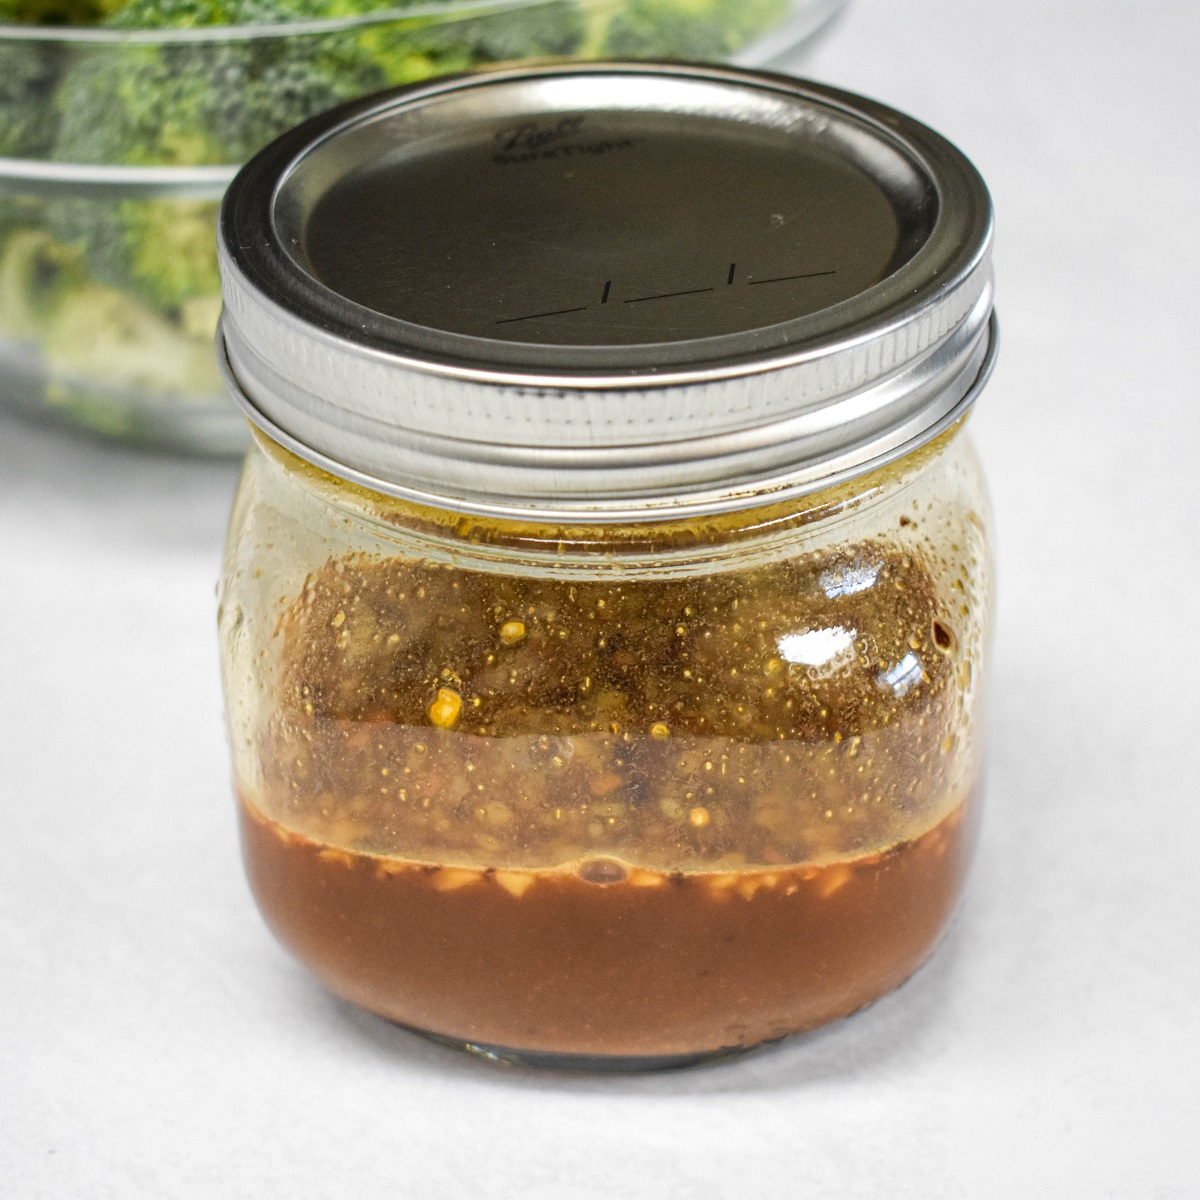 The stir fry sauce in a small mason jar with a bowl of broccoli in the background all set on a white table.